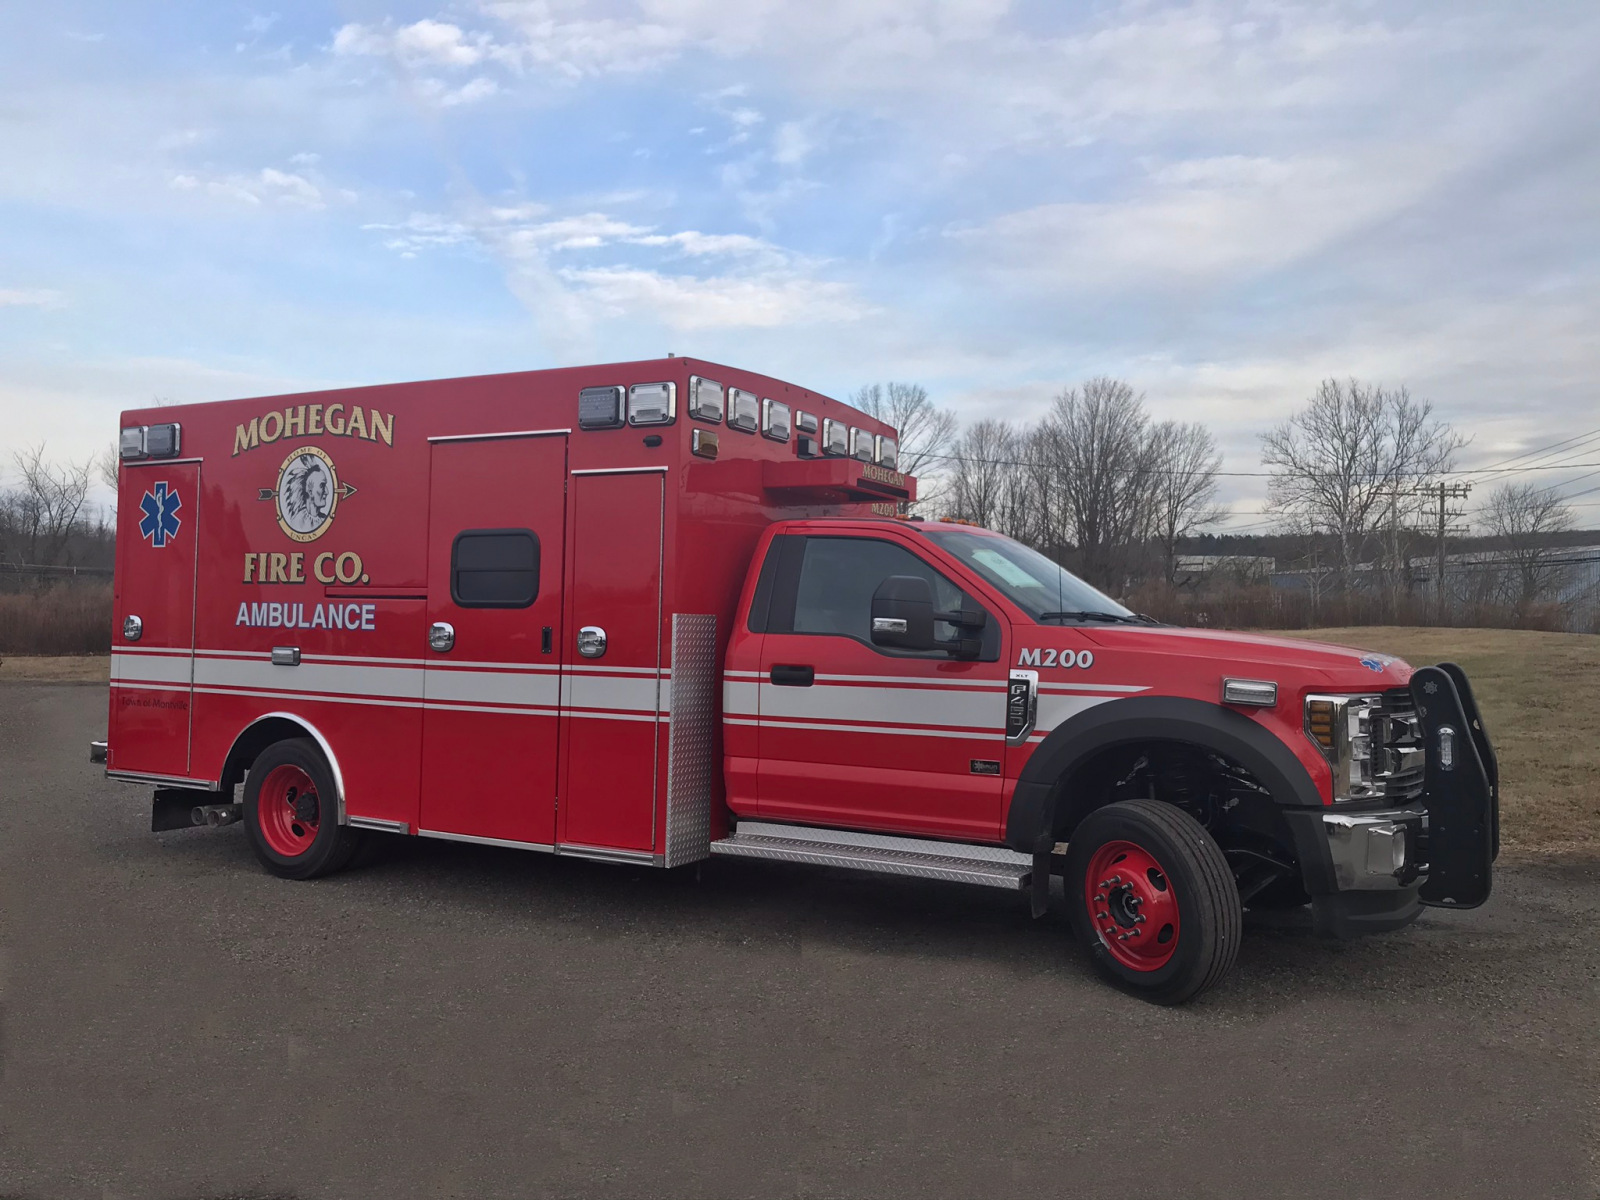 Braun Chief XL Ford F450 Ambulance Delivered to Mohegan Fire Company